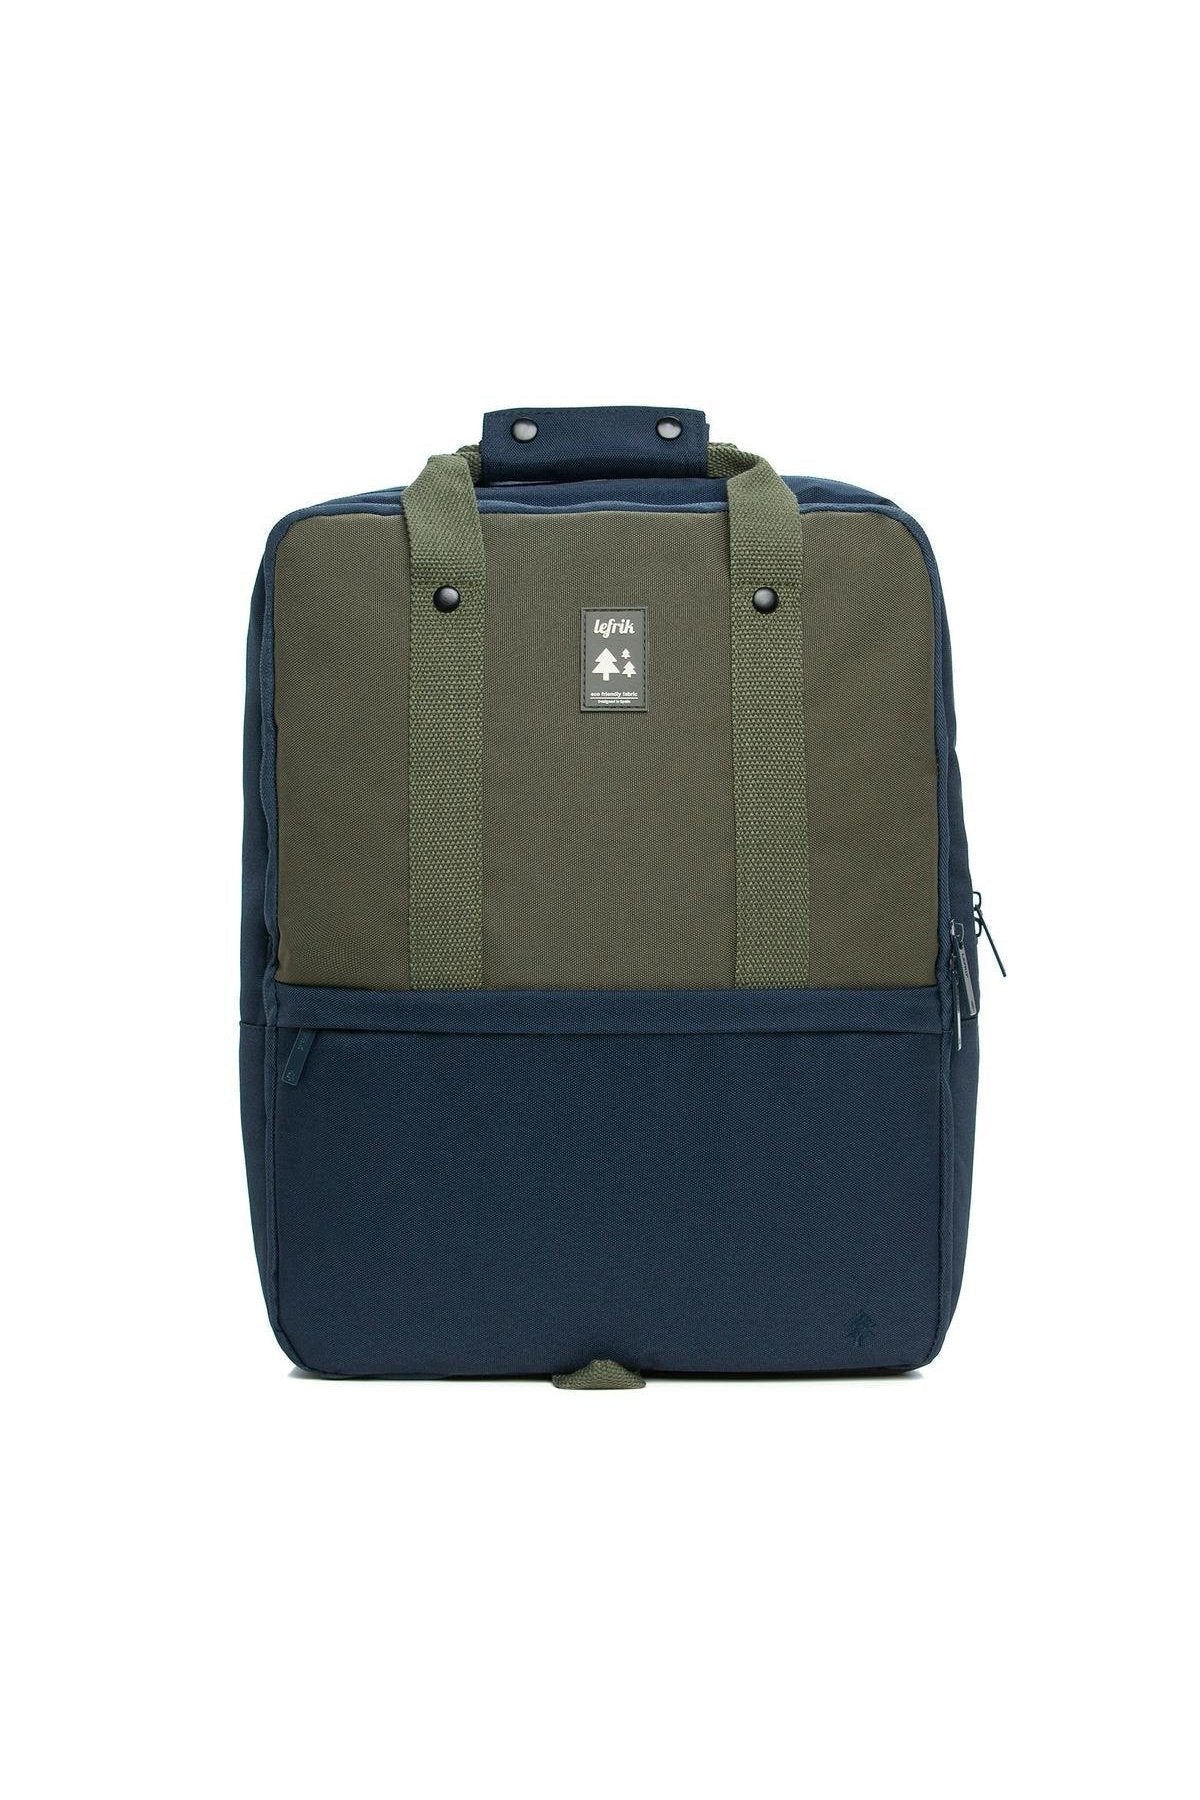 Lefrik Daily Backpack-Accessories-Ohh! By Gum - Shop Sustainable